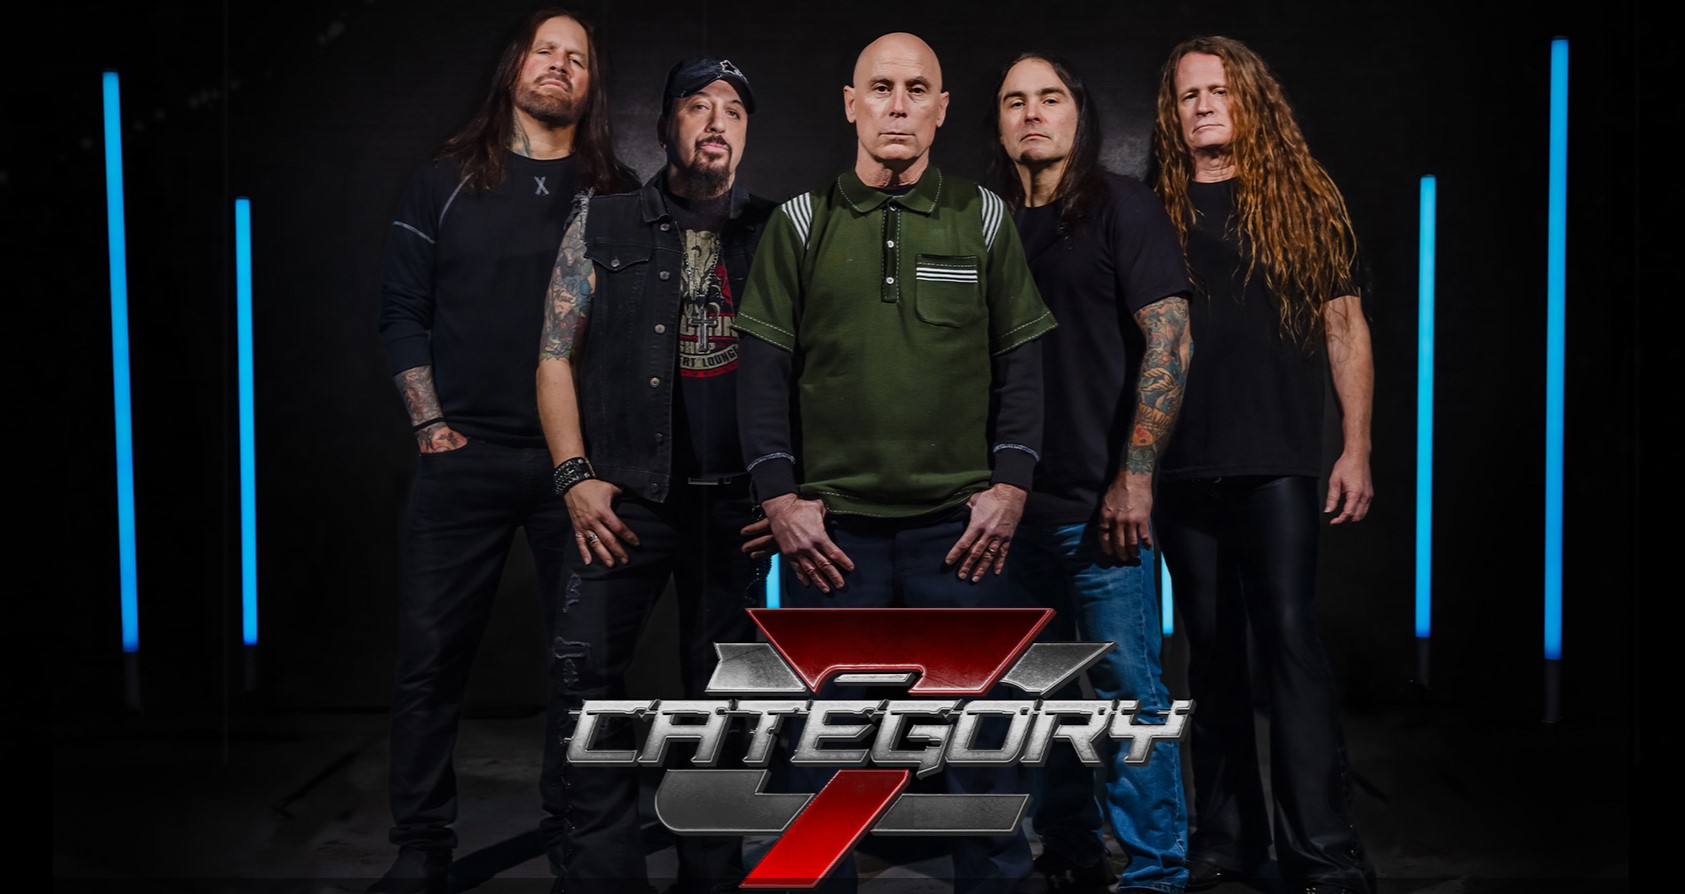 Check Out New Metal Supergroup Category 7 Featuring Members From Anthrax, Armored Saint, Adrenaline Mob, Machine Head, Overkill, Exodus, And Shadows Fall